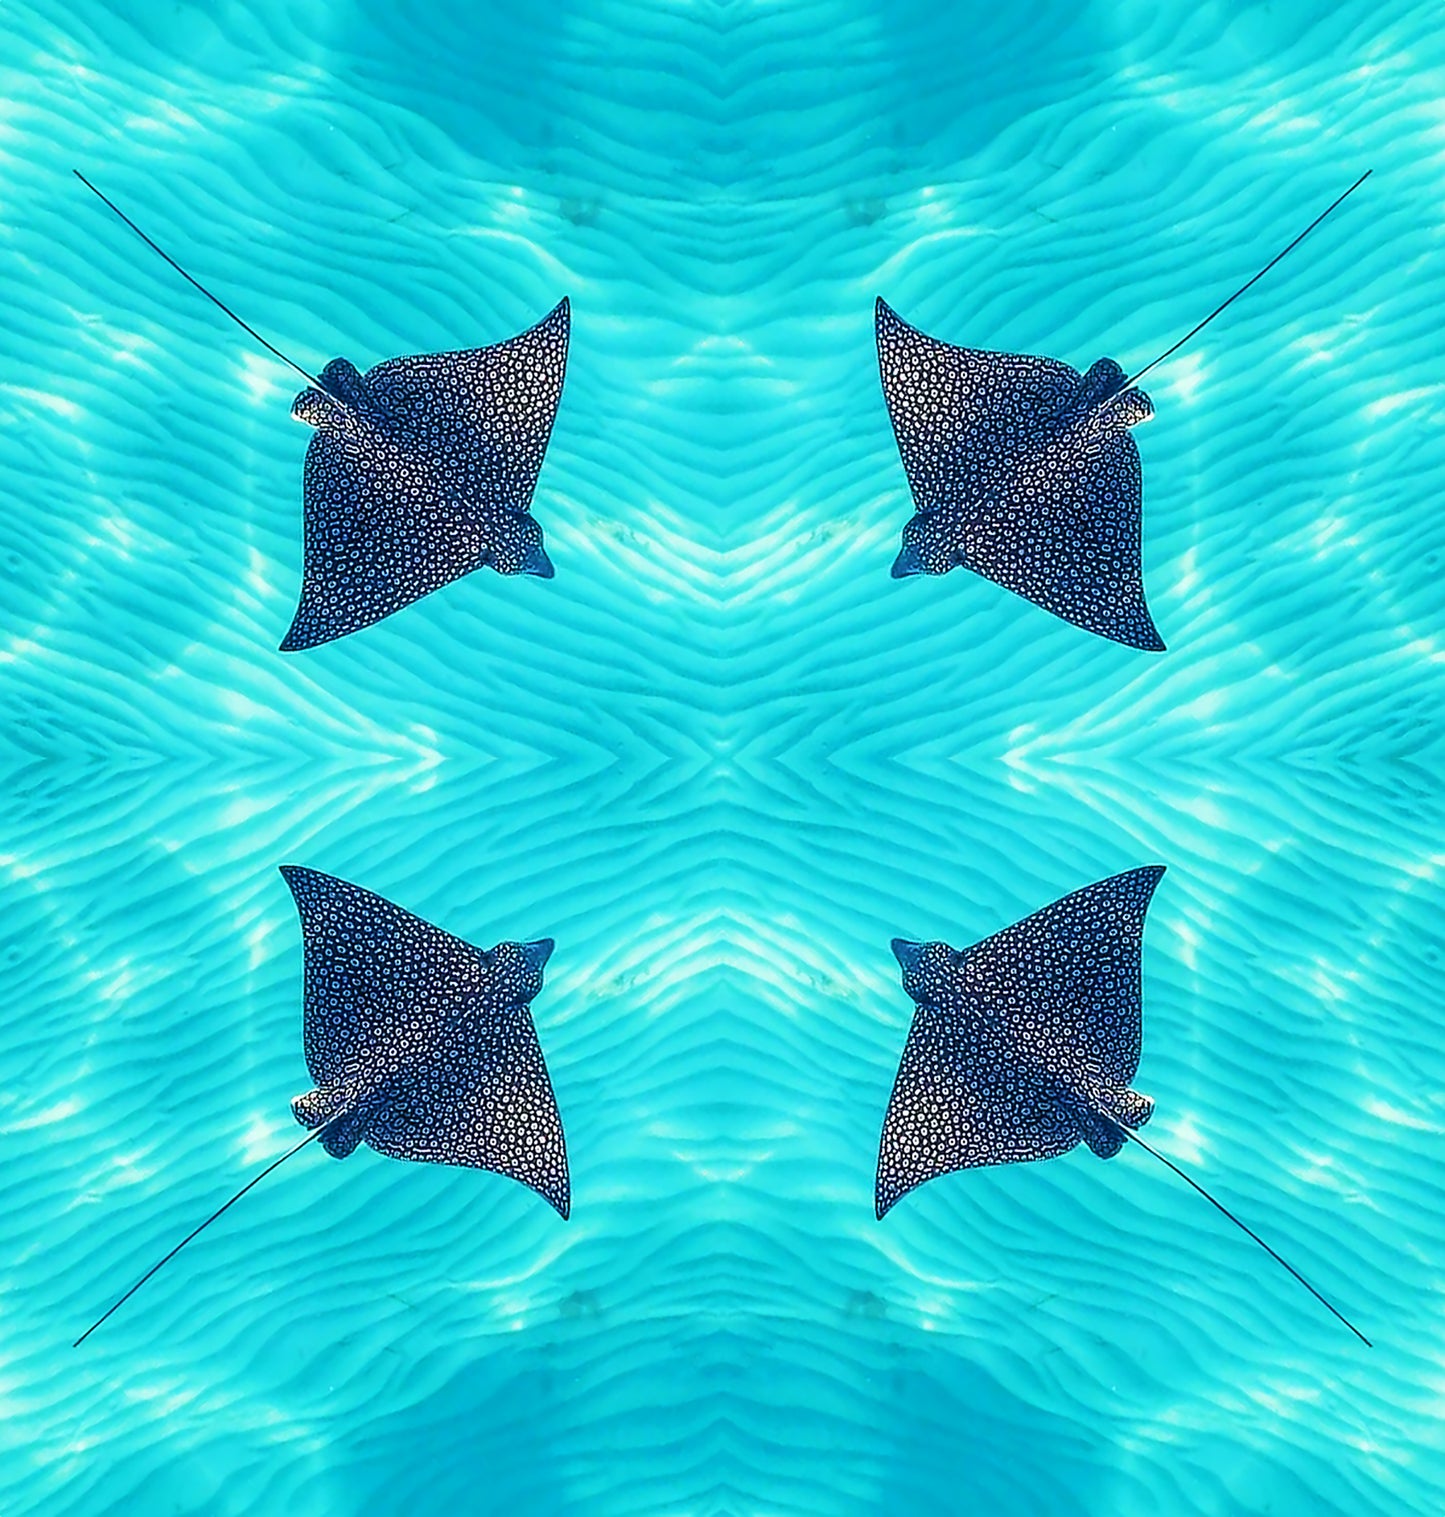 SPOTTED EAGLE RAY BOTTOMS